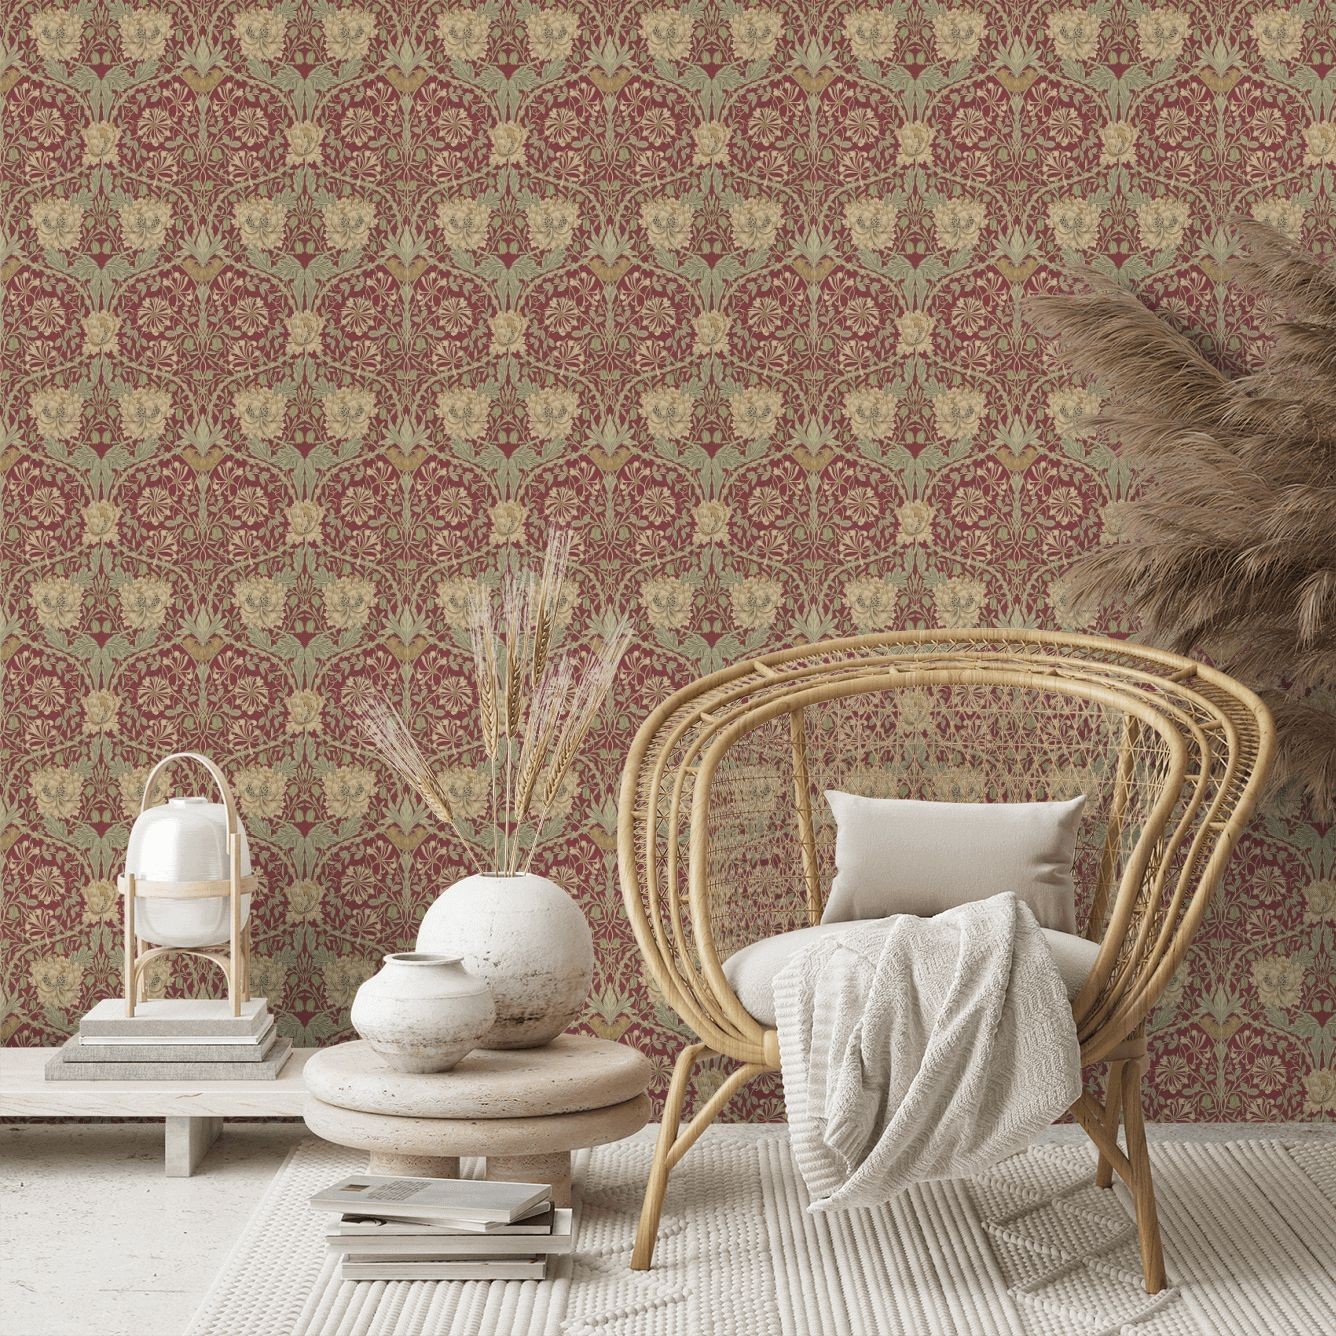 Honeysuckle and Tulip Wallpaper - Red/Gold - By Morris and Co - 214700